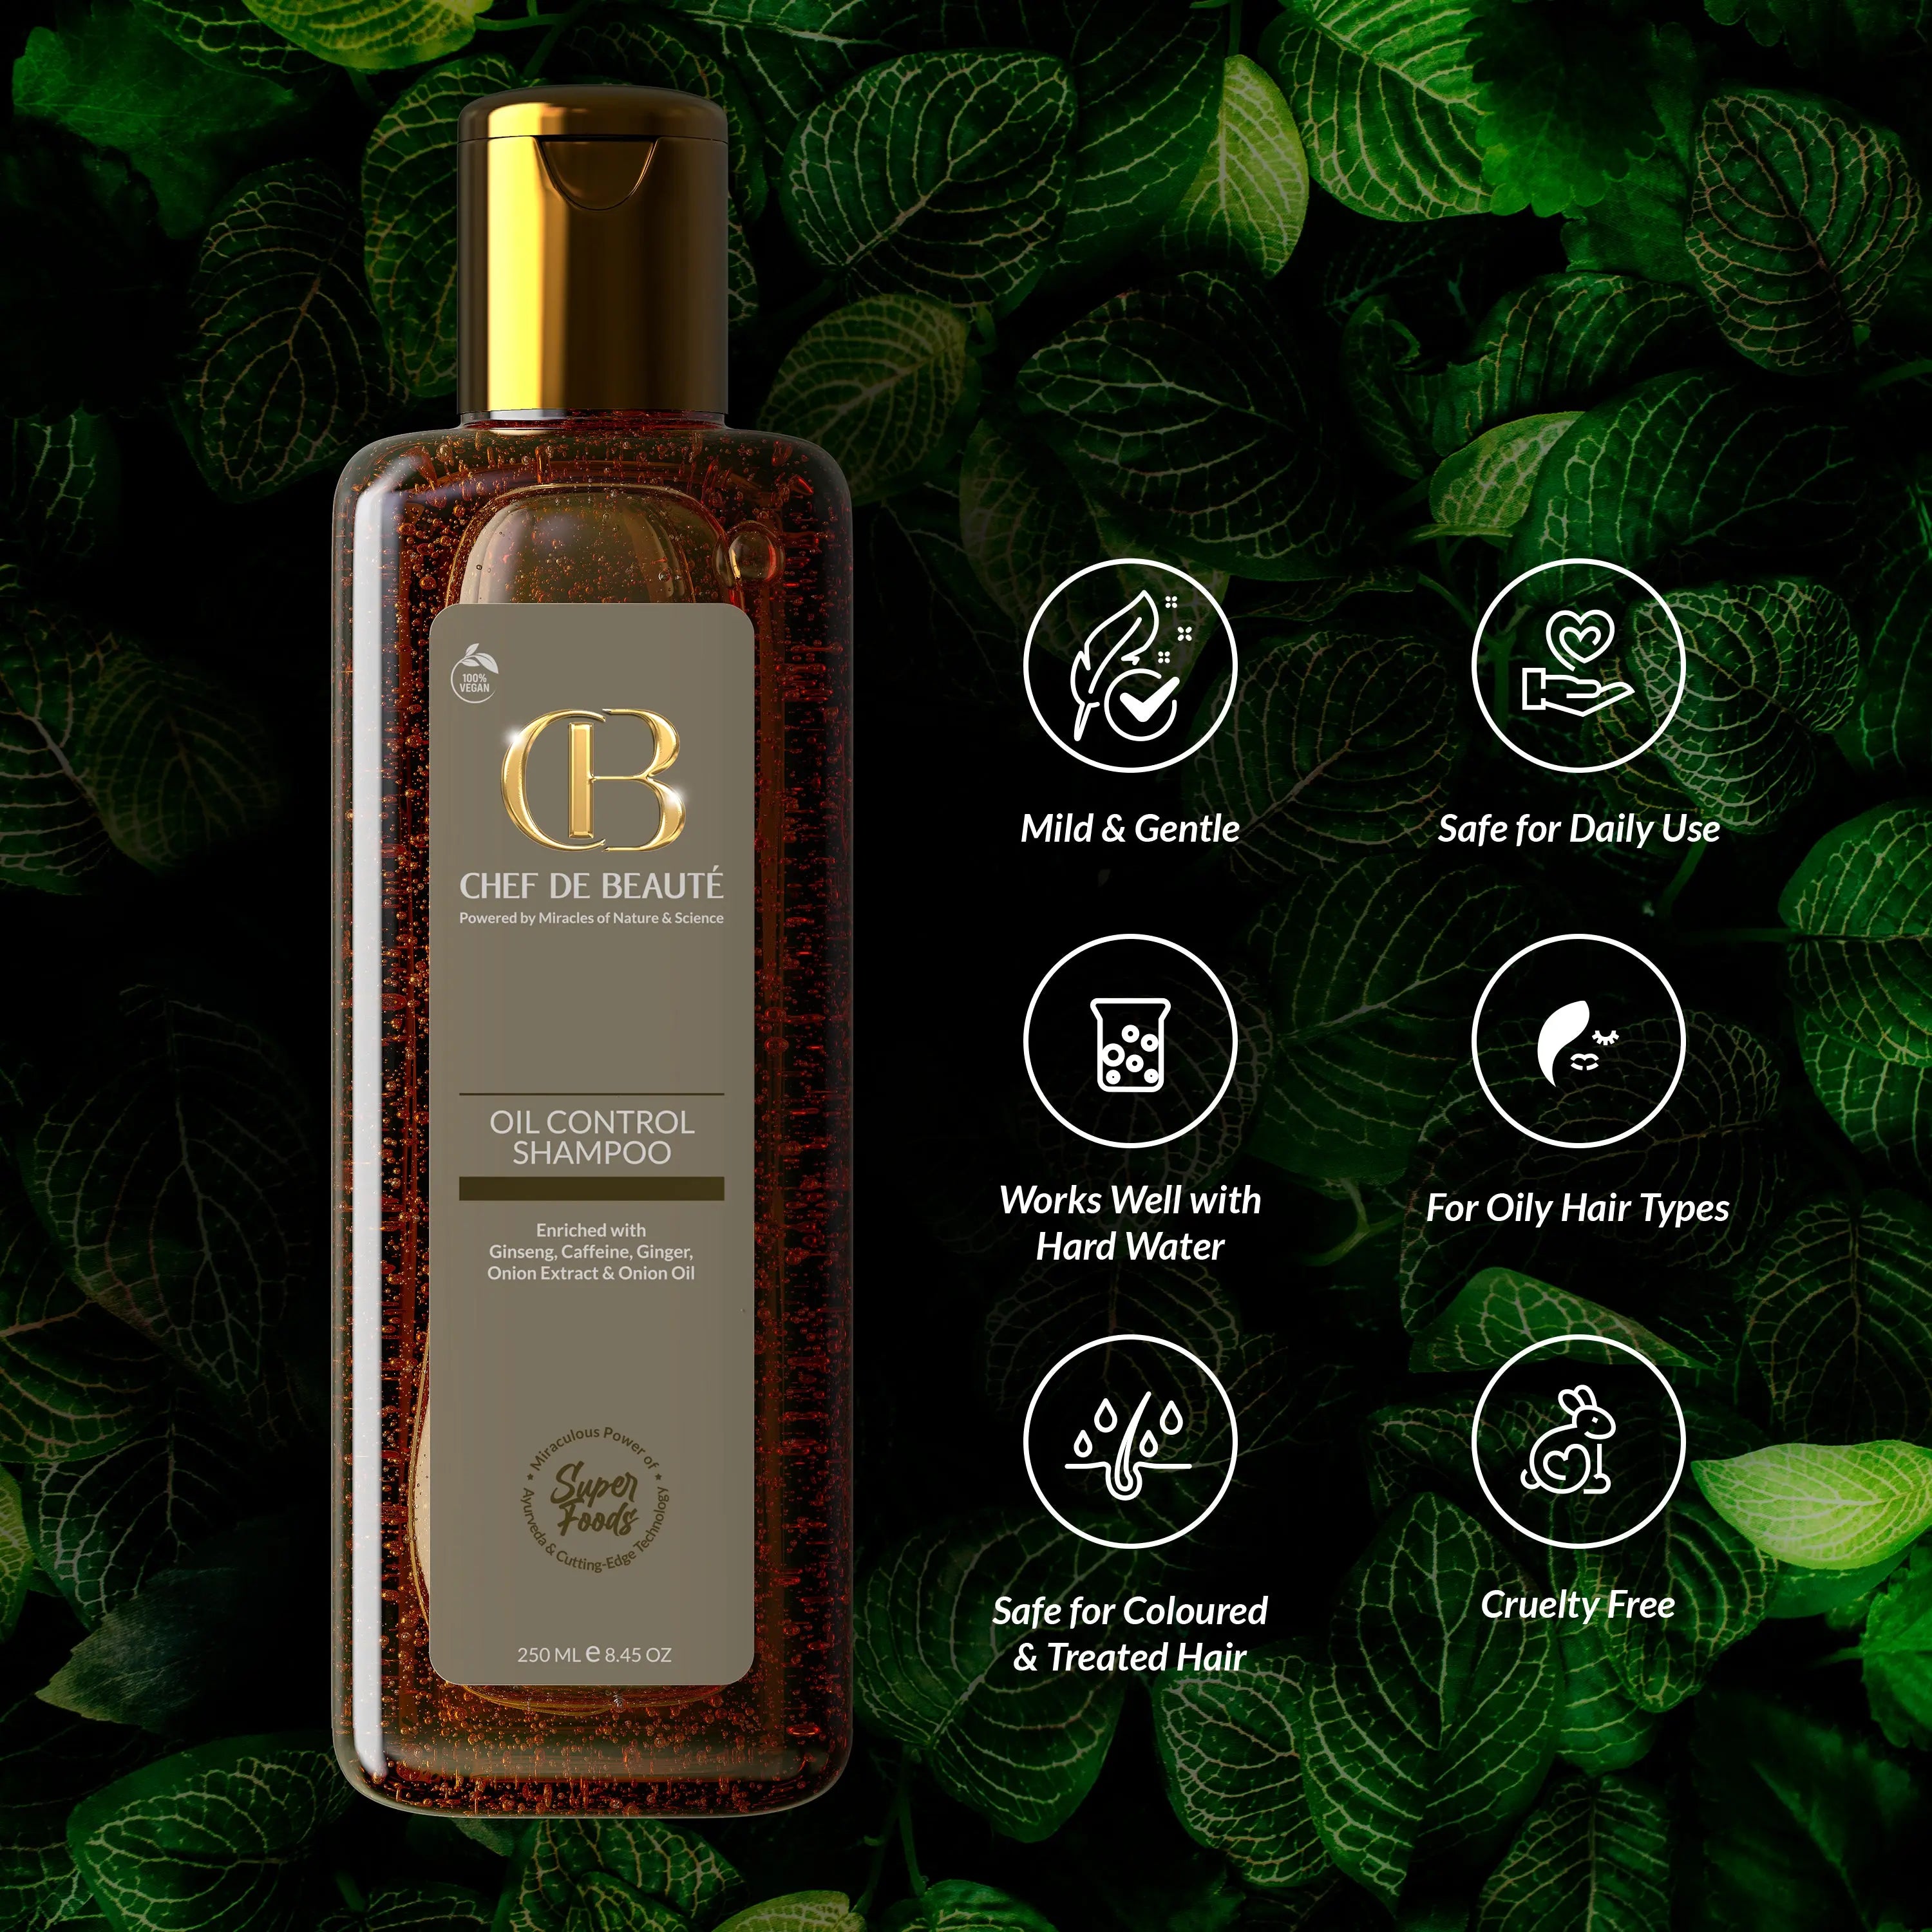 CDB's SuperFoods Powered Oil Control & DHT Blocker Energising Shampoo with FusionTech CHEF DE BEAUTÉ